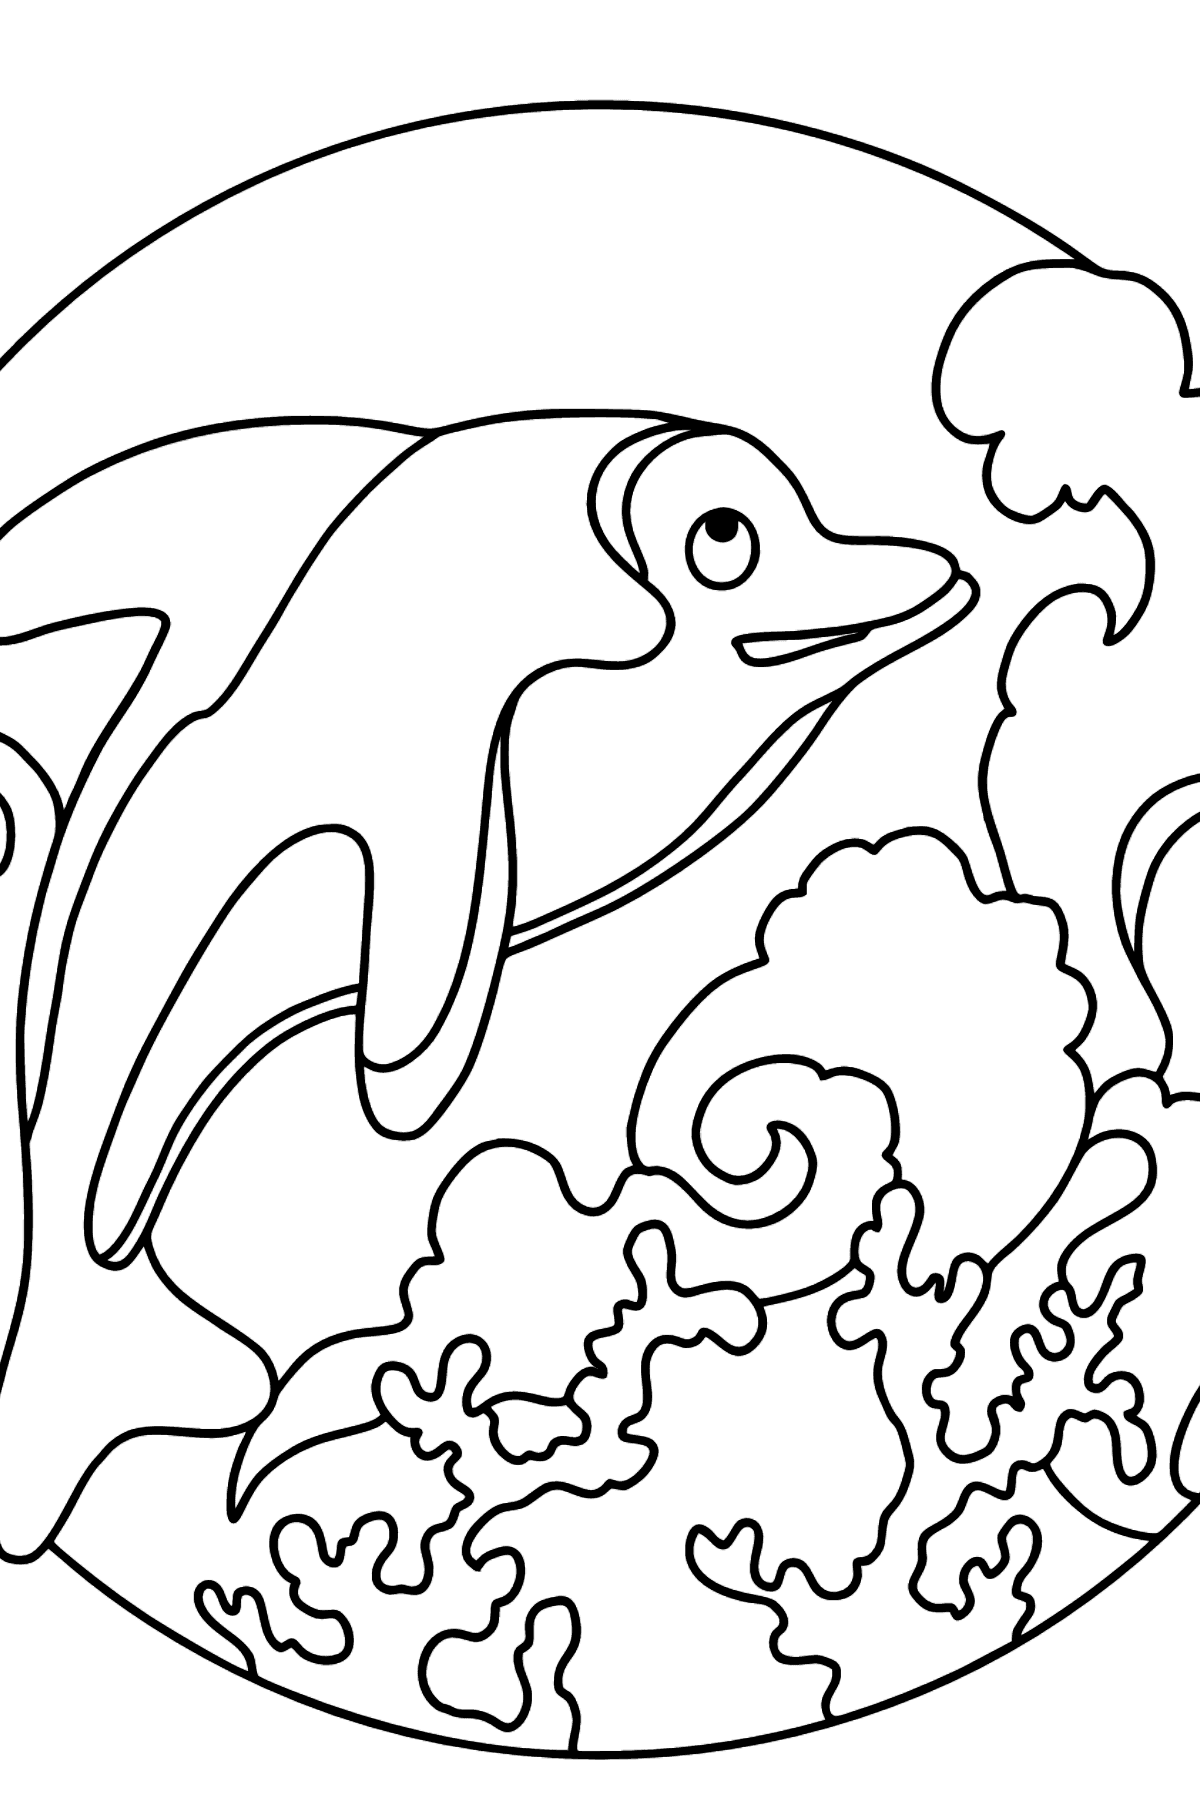 Coloring Page - A Dolphin, an Inquisitive Animal - Coloring Pages for Kids